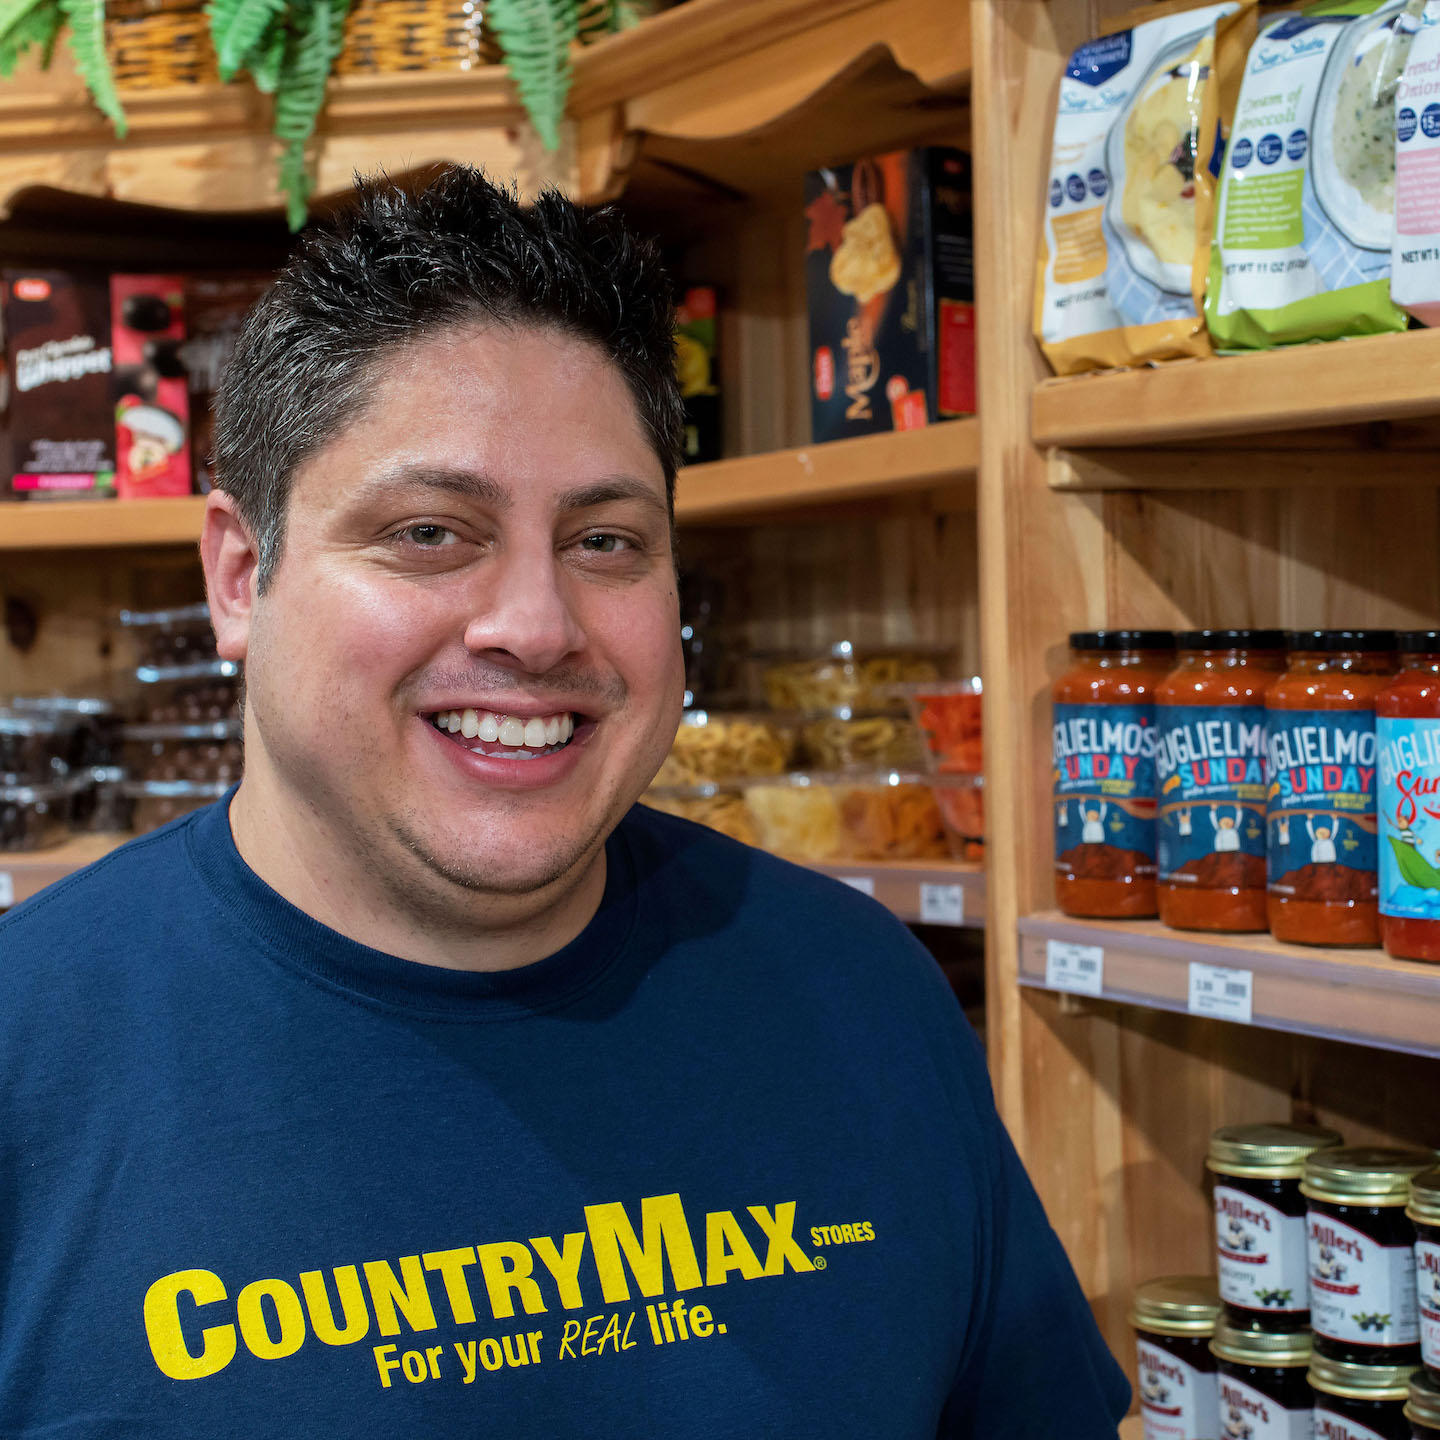 Paul Guglielmo (Image provided by CountryMax Stores)